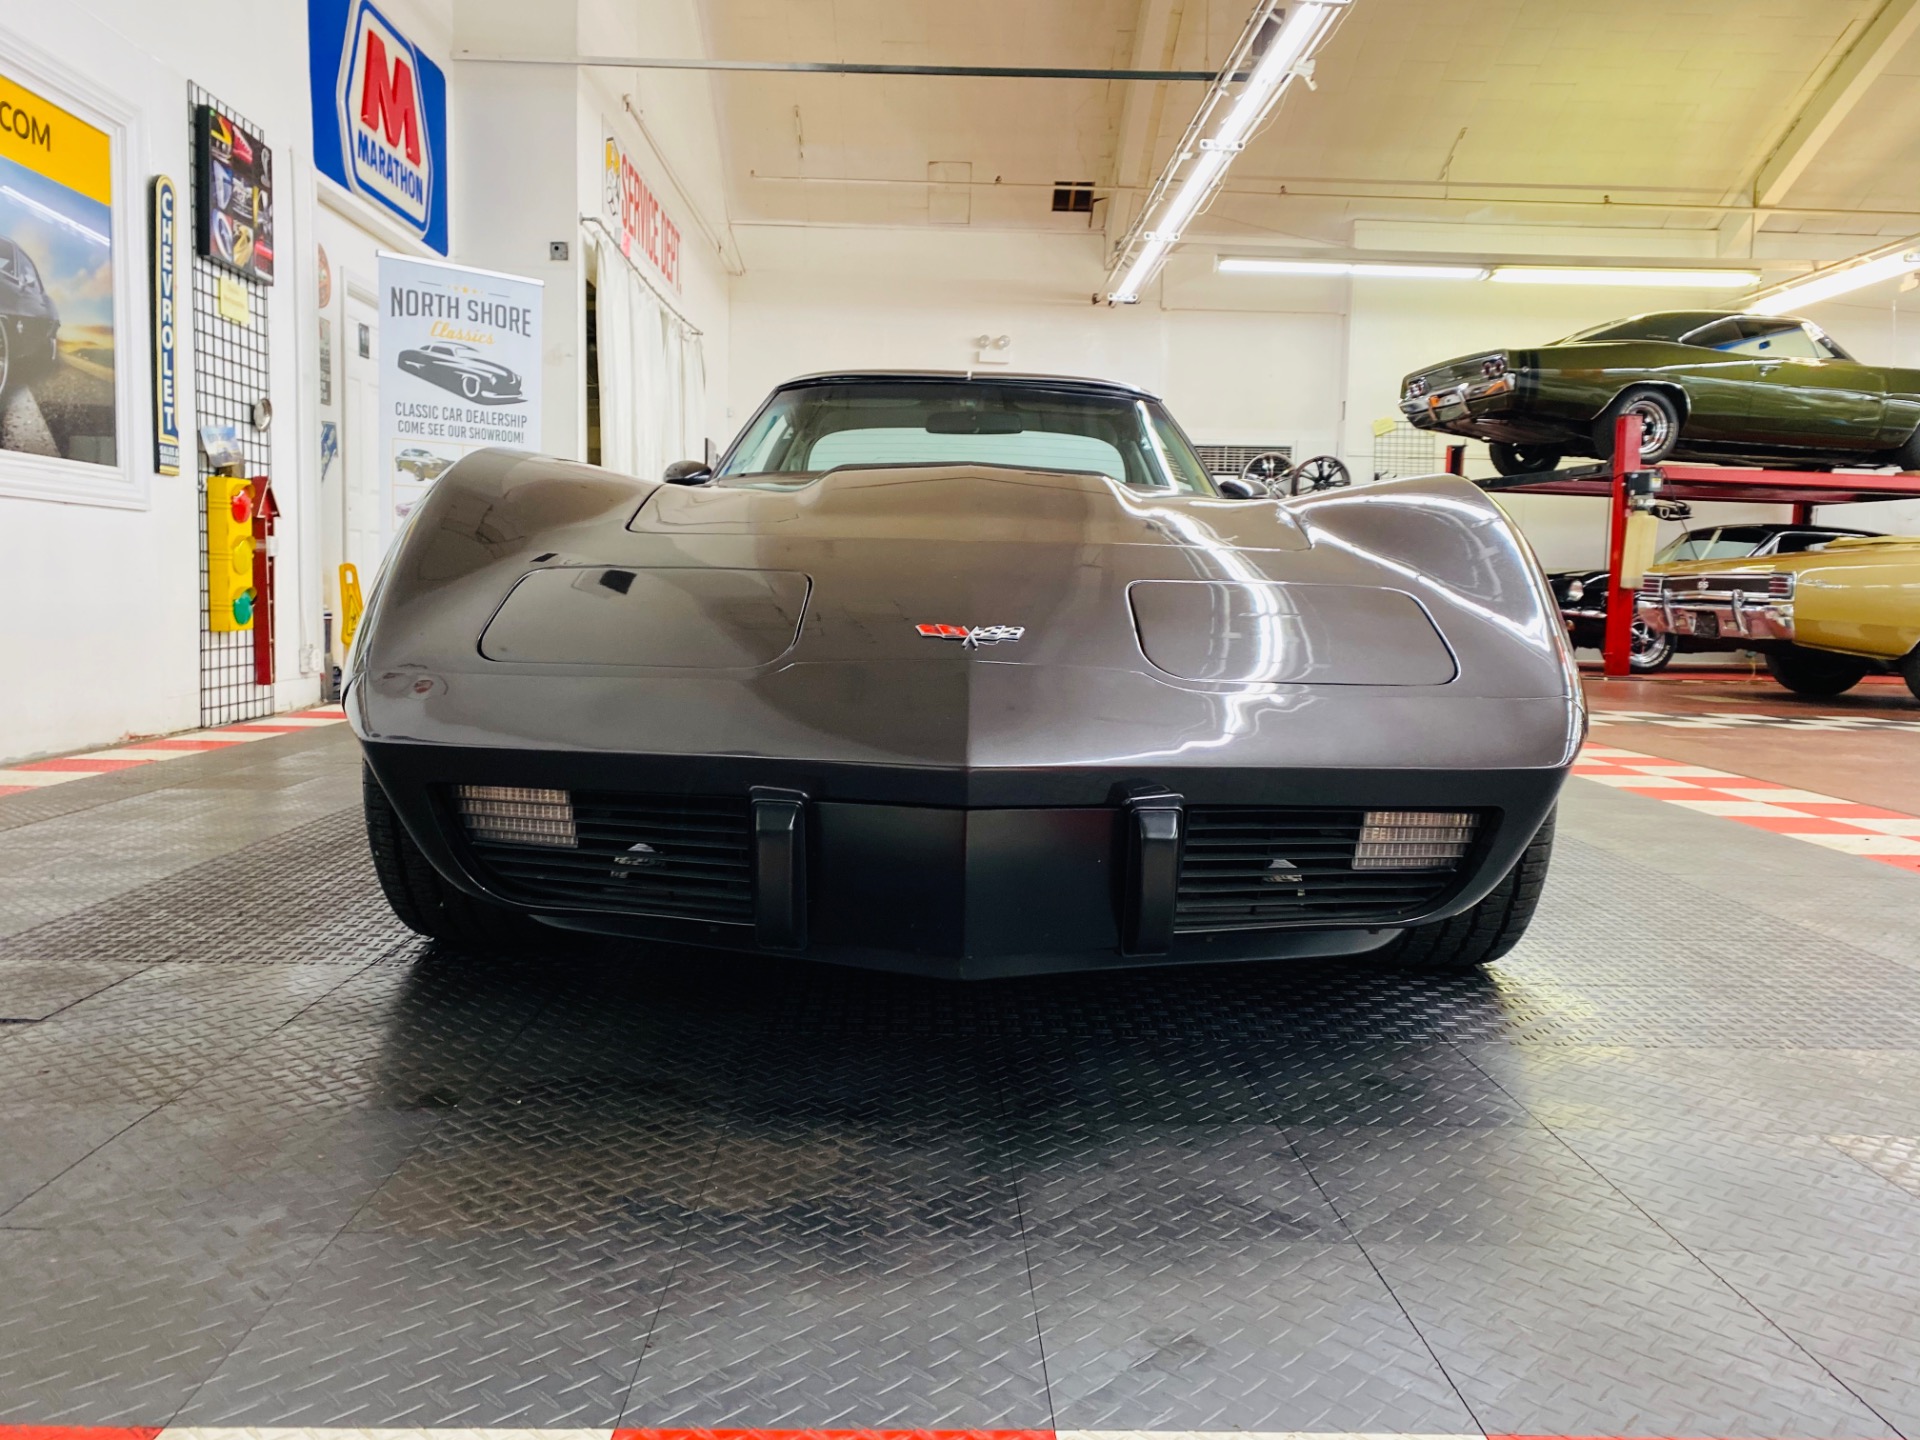 Used 1977 Chevrolet Corvette - RESTO MOD - T TOPS - DRIVES EXCELLENT - SEE VIDEO | Mundelein, IL